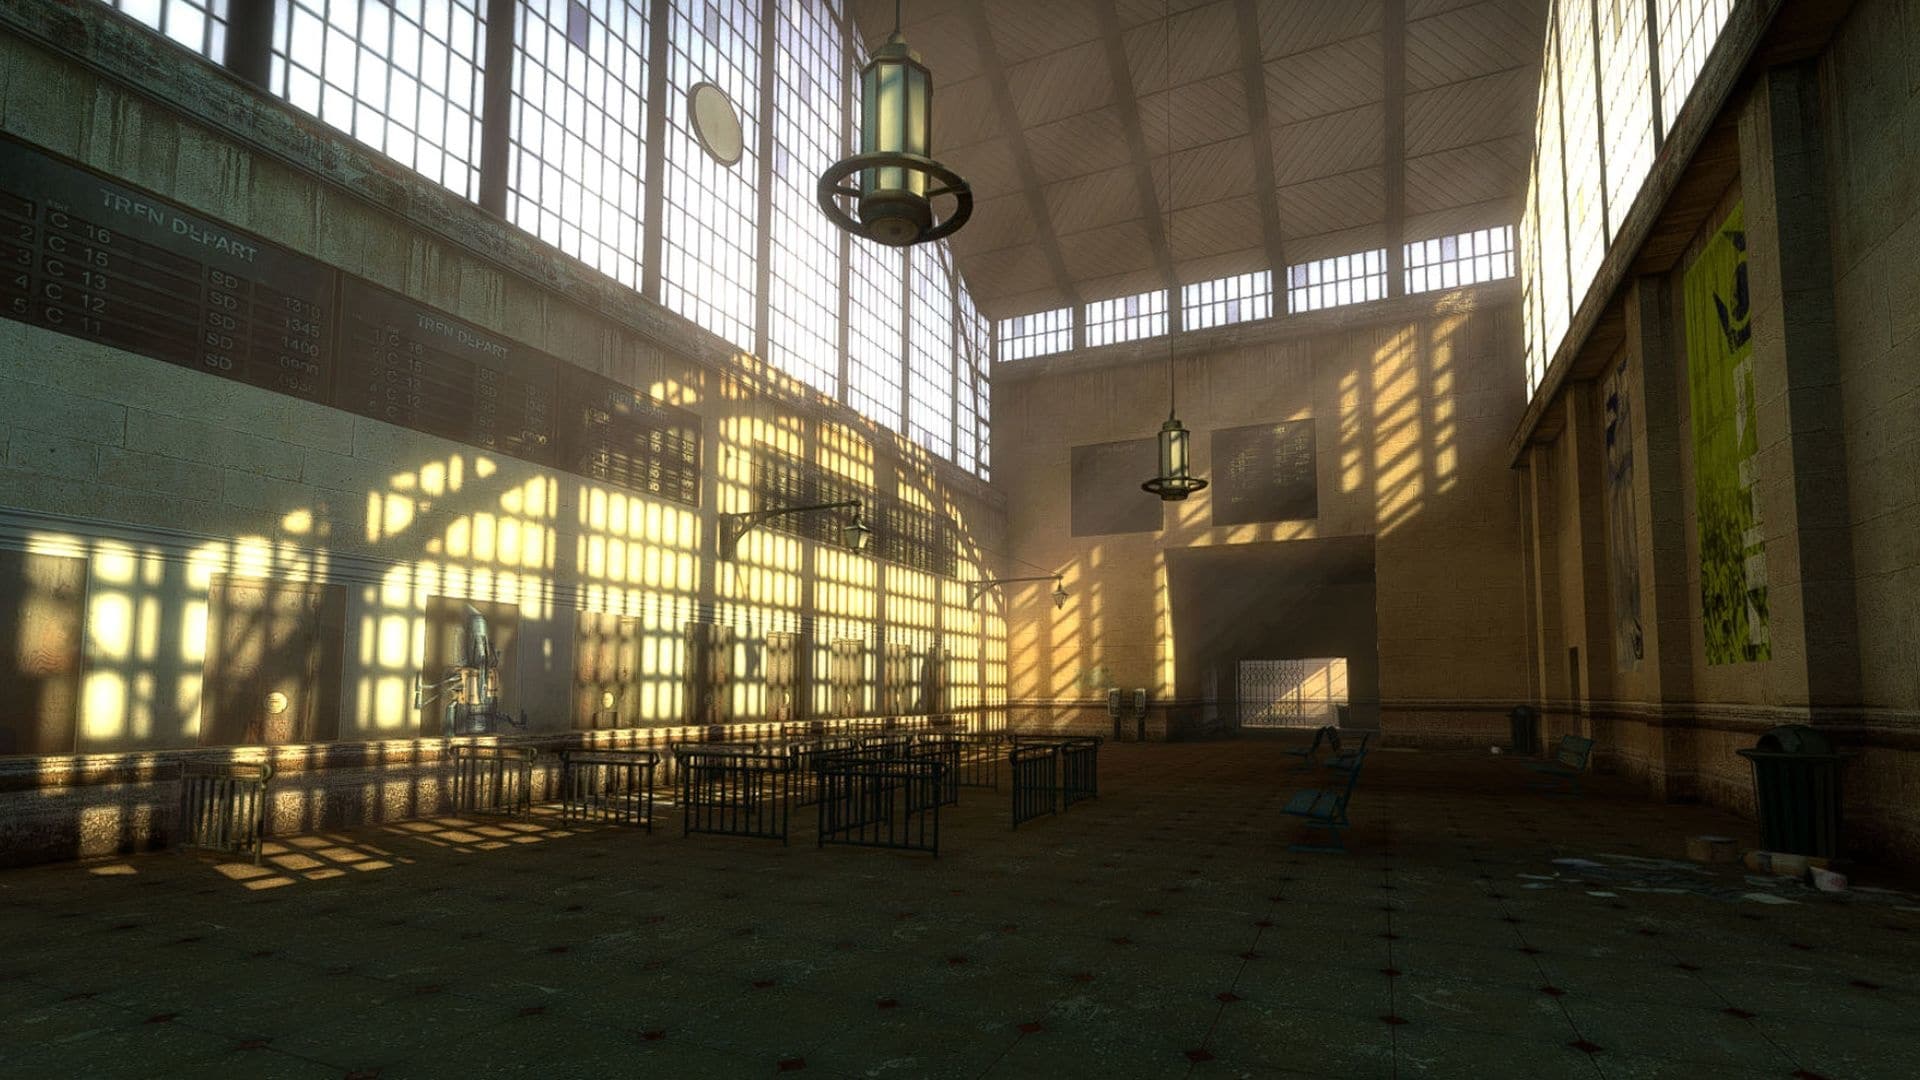 (For the future, the mod team has promised a graphics update in addition to the implementation of the Half-Life episodes, which should optimise textures and the somewhat outdated lighting of the game, among other things.)